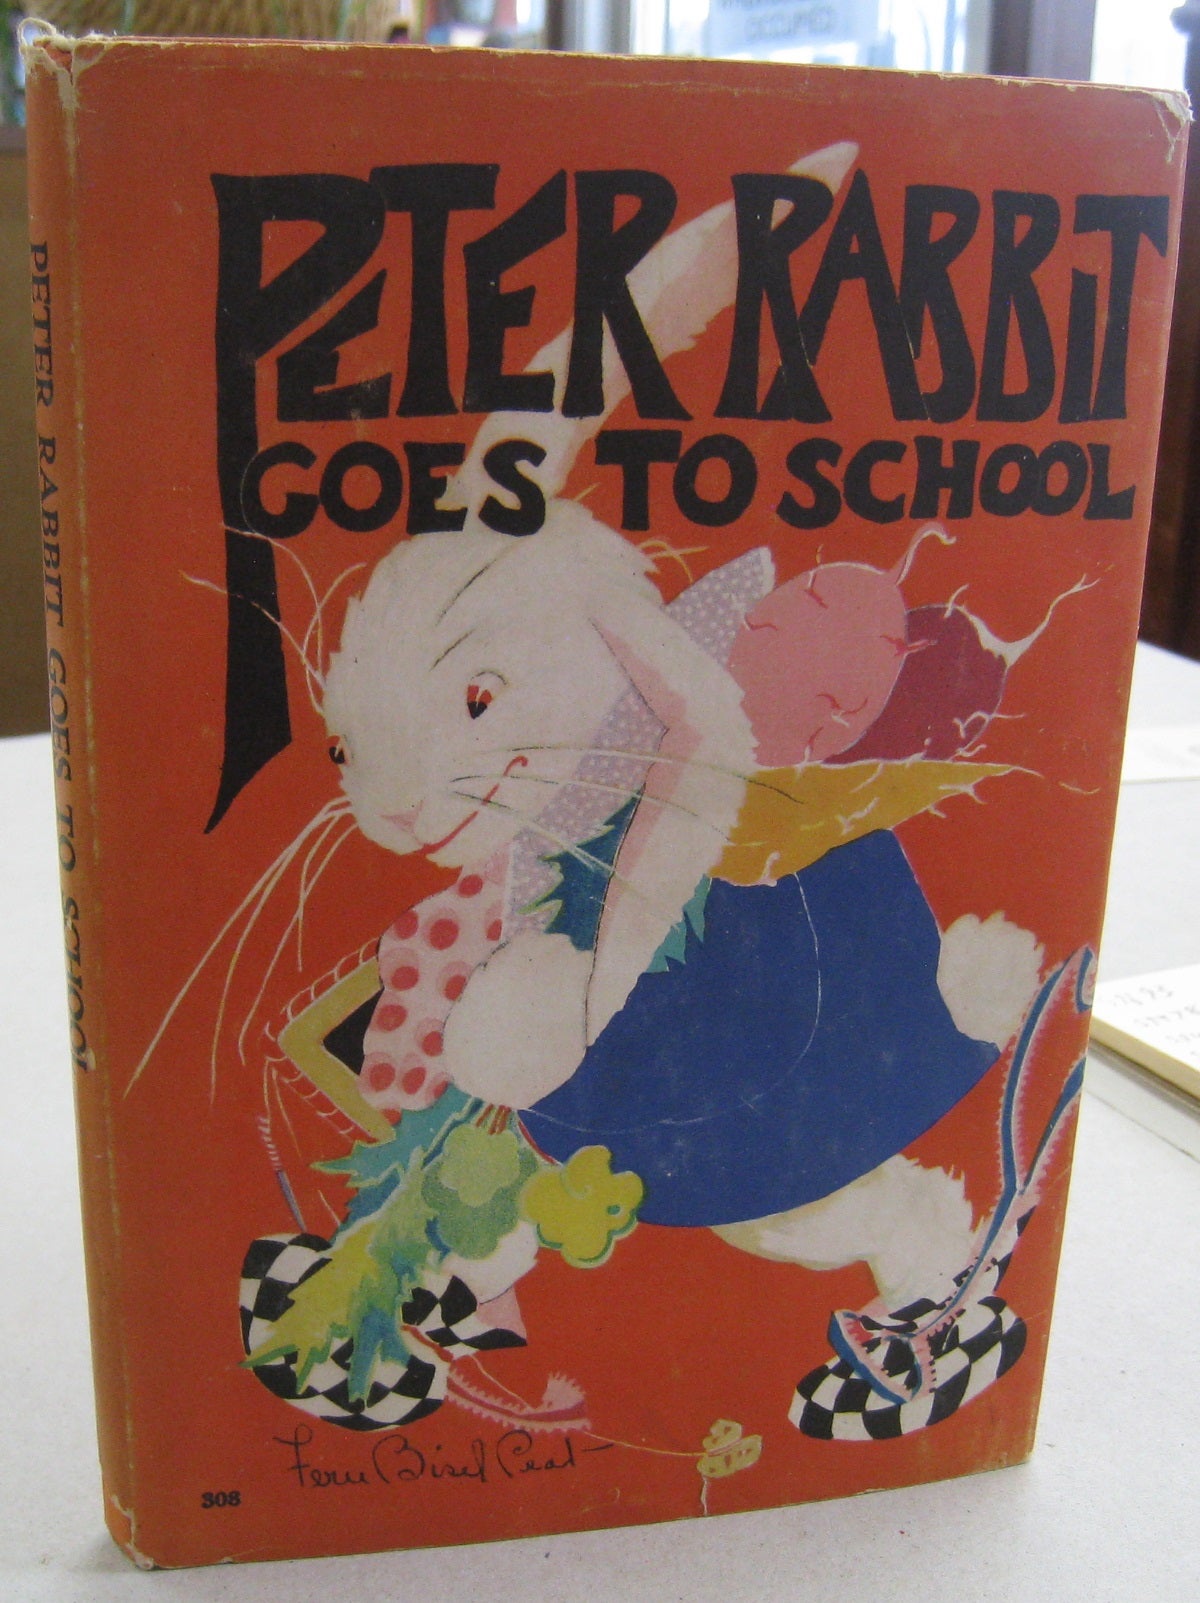 Peter Rabbit Little Golden Book Junk Journal (to be held at South